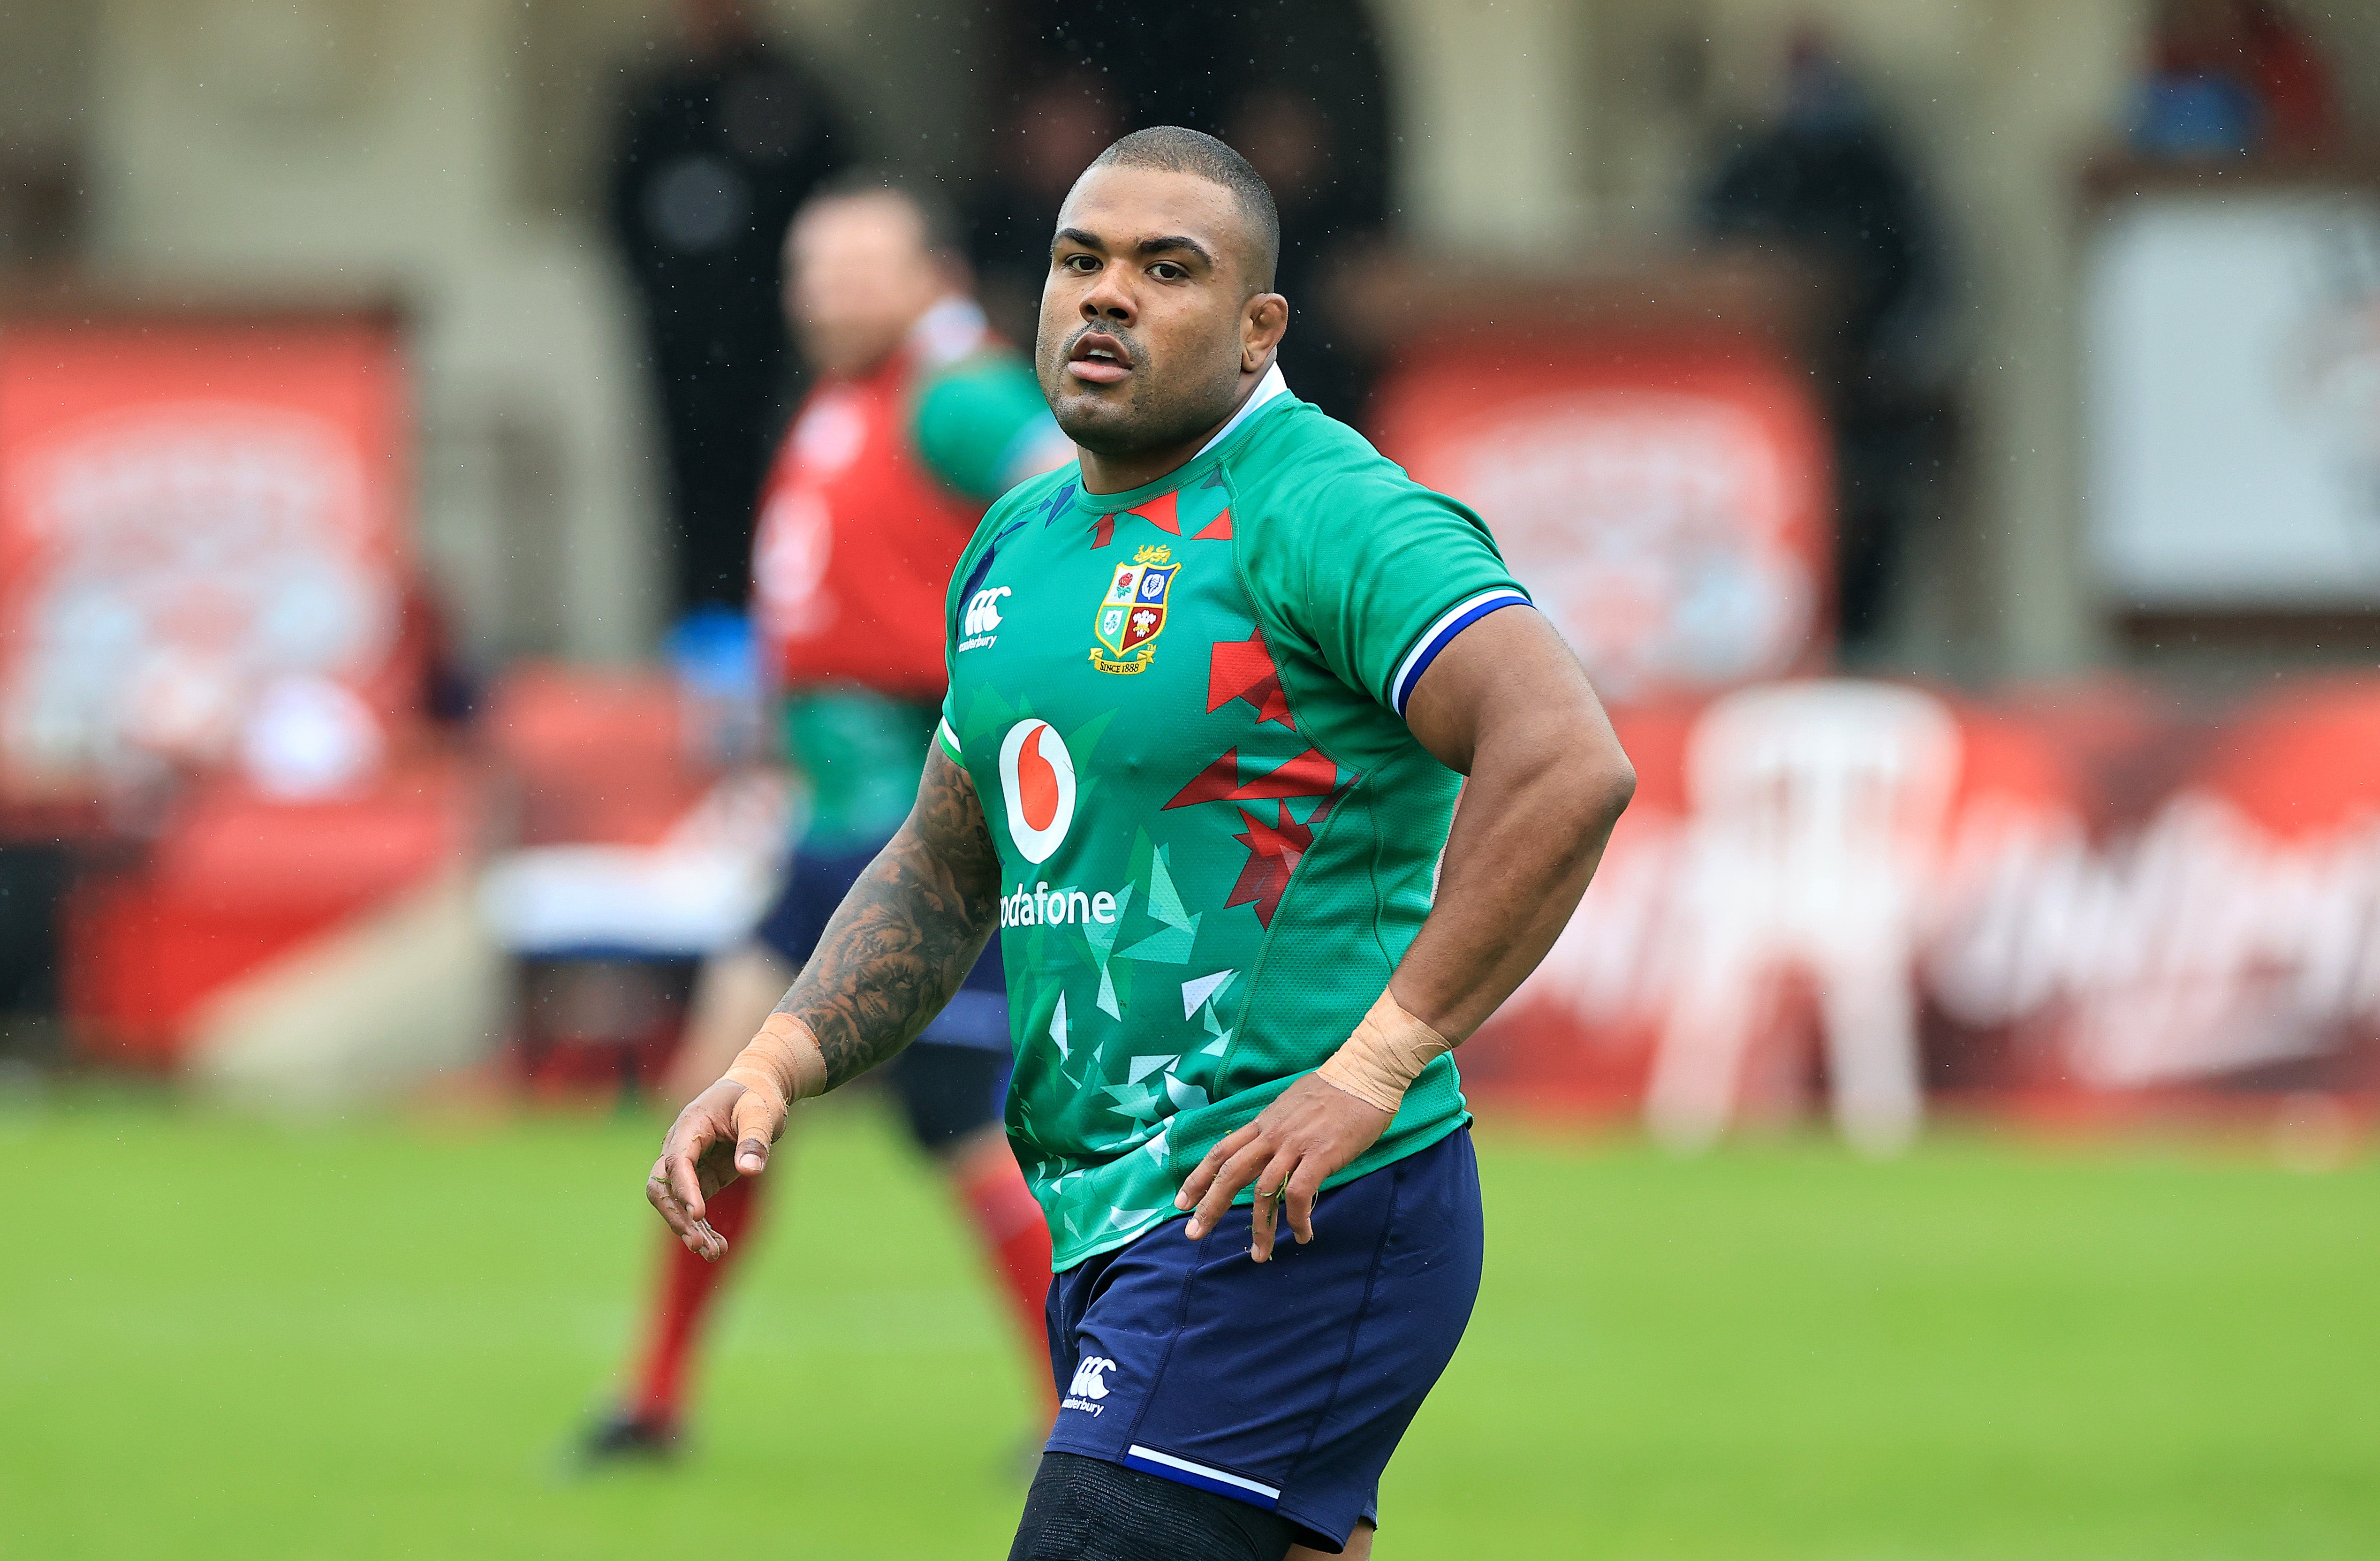 Sinckler was brought into the Lions squad as a replacement for Andrew Porter